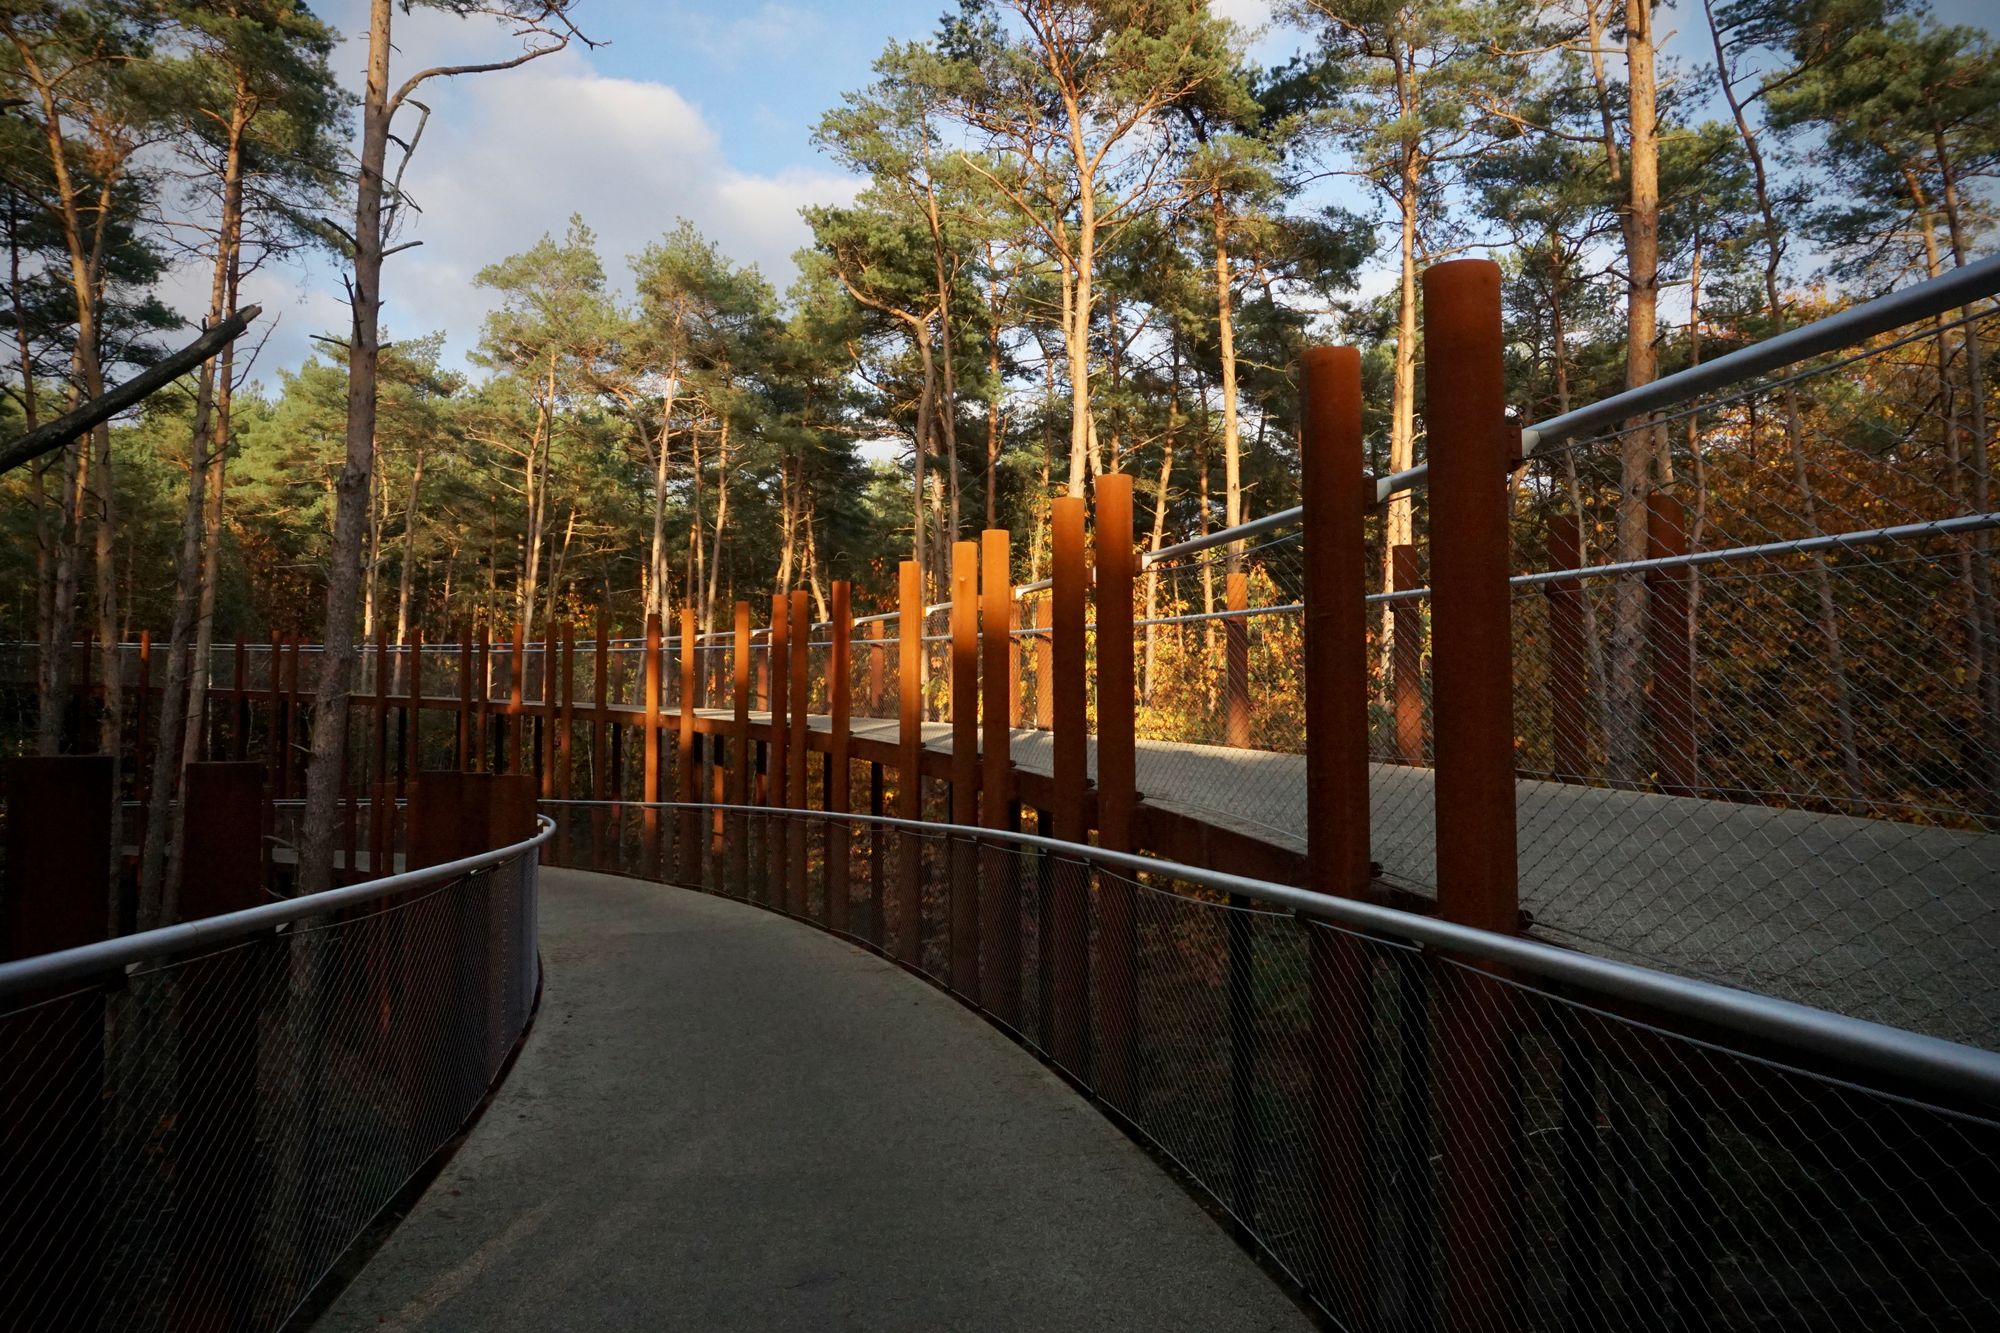 A view from the cycle track. Trees are lit by the sun as the track curves to the left.